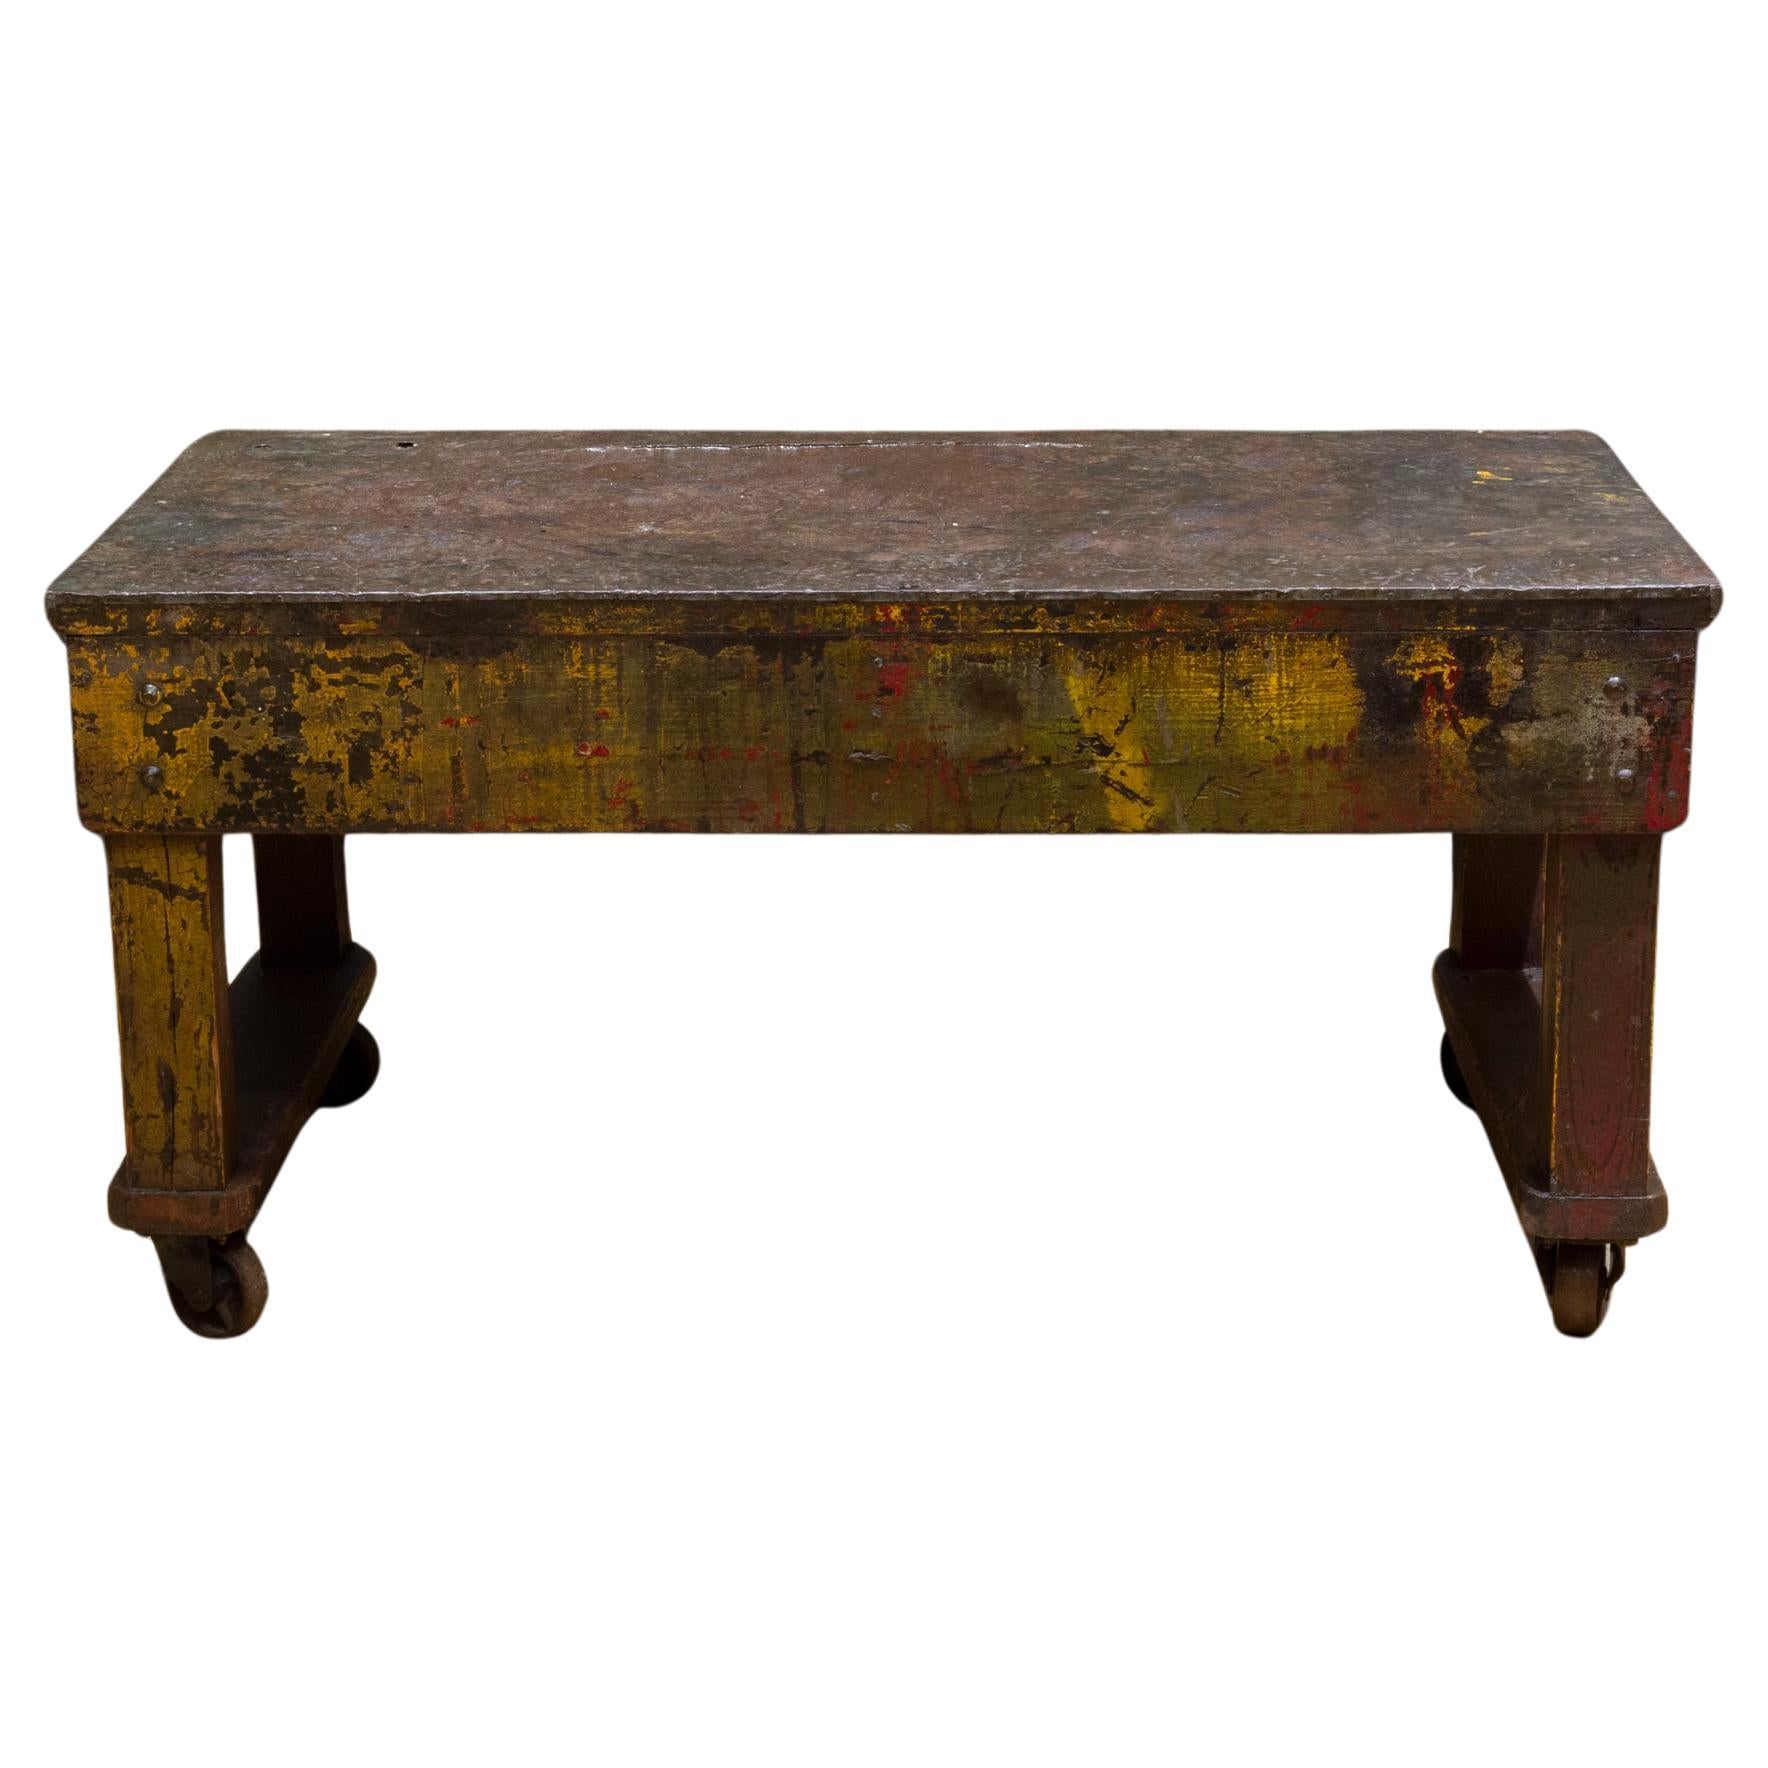 Early 20th c. Distressed Factory Rolling Worktable/Cart c.1930-1940